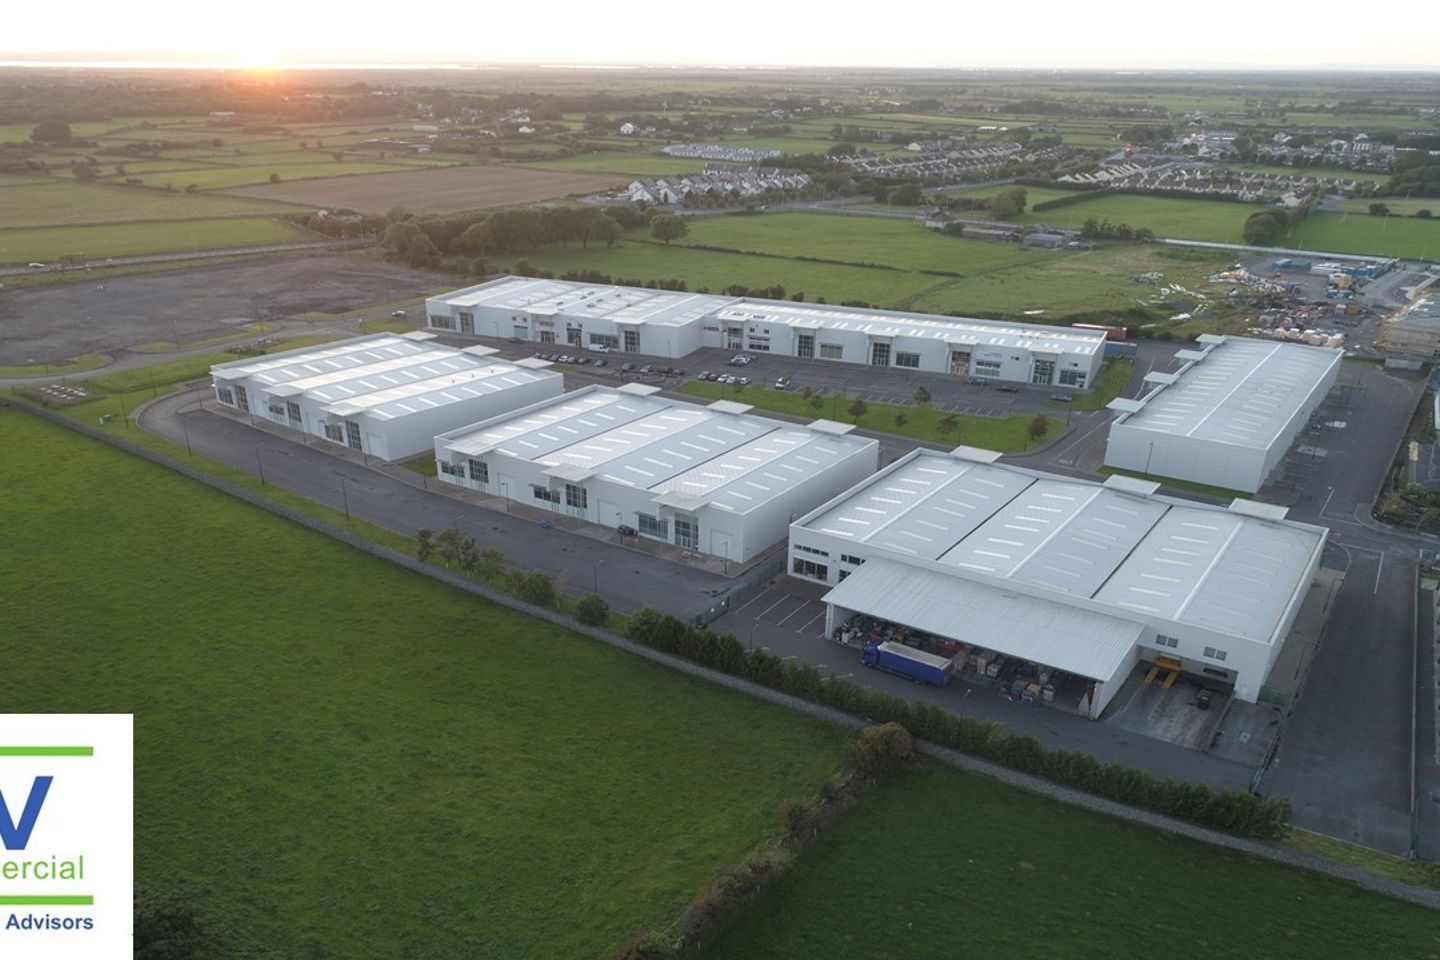 Commercial site 4.3 acres based on Phase 2 at Site at Claregalway Corporate Park, Claregalway, Co. Galway